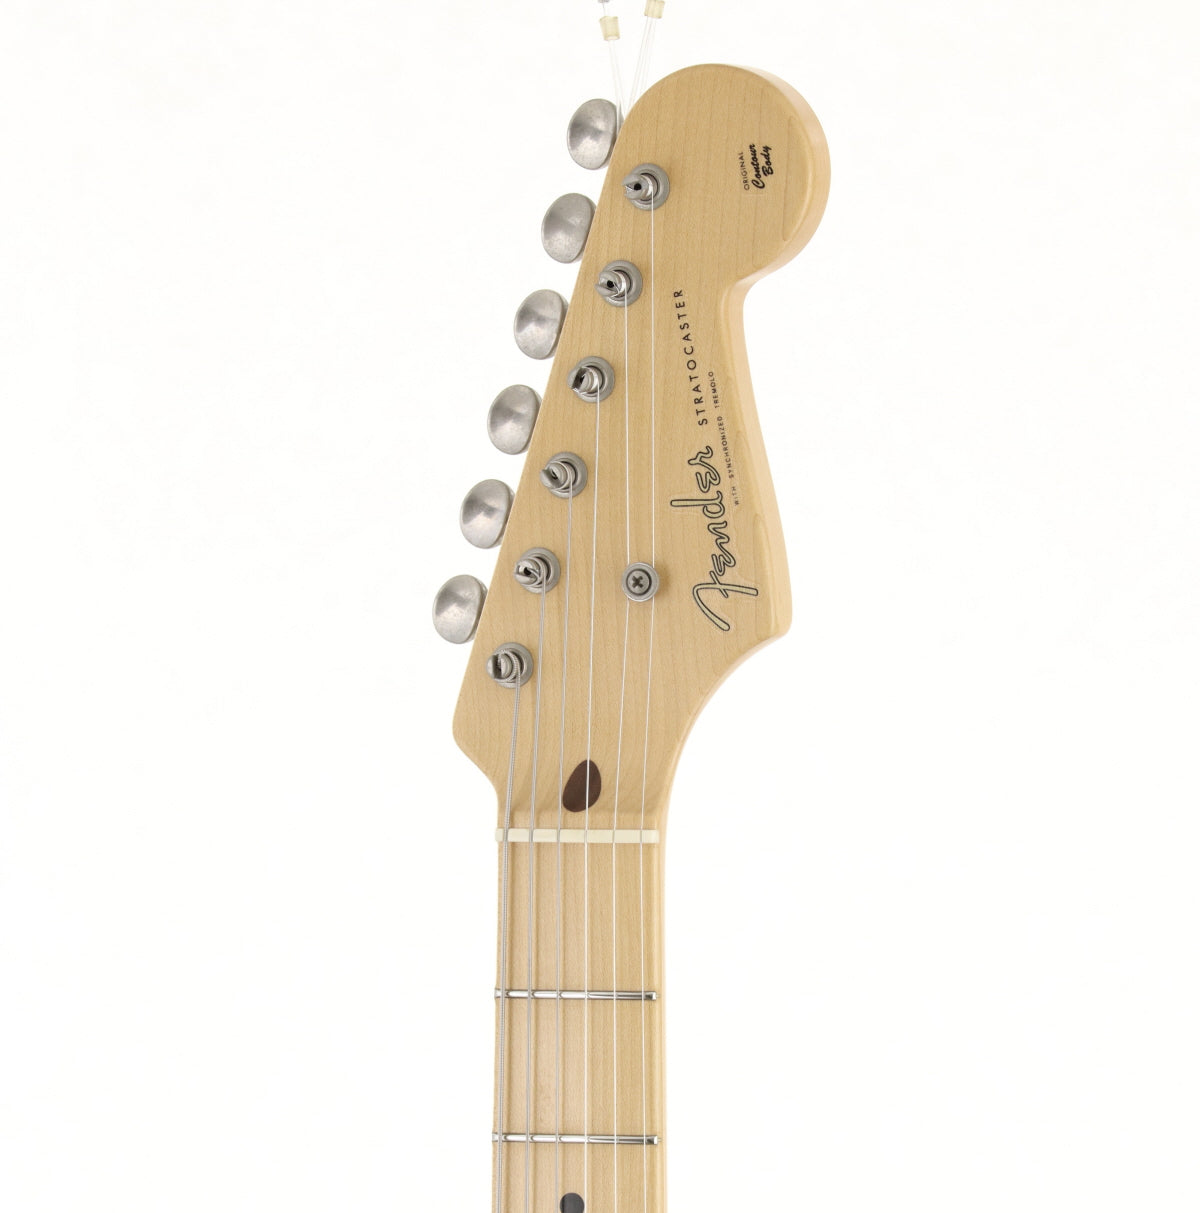 [SN 4653] USED Fender Custom Shop / MBS 50th Anniversary 1954 Stratocaster by Mark Kendrick, 2004 [09]